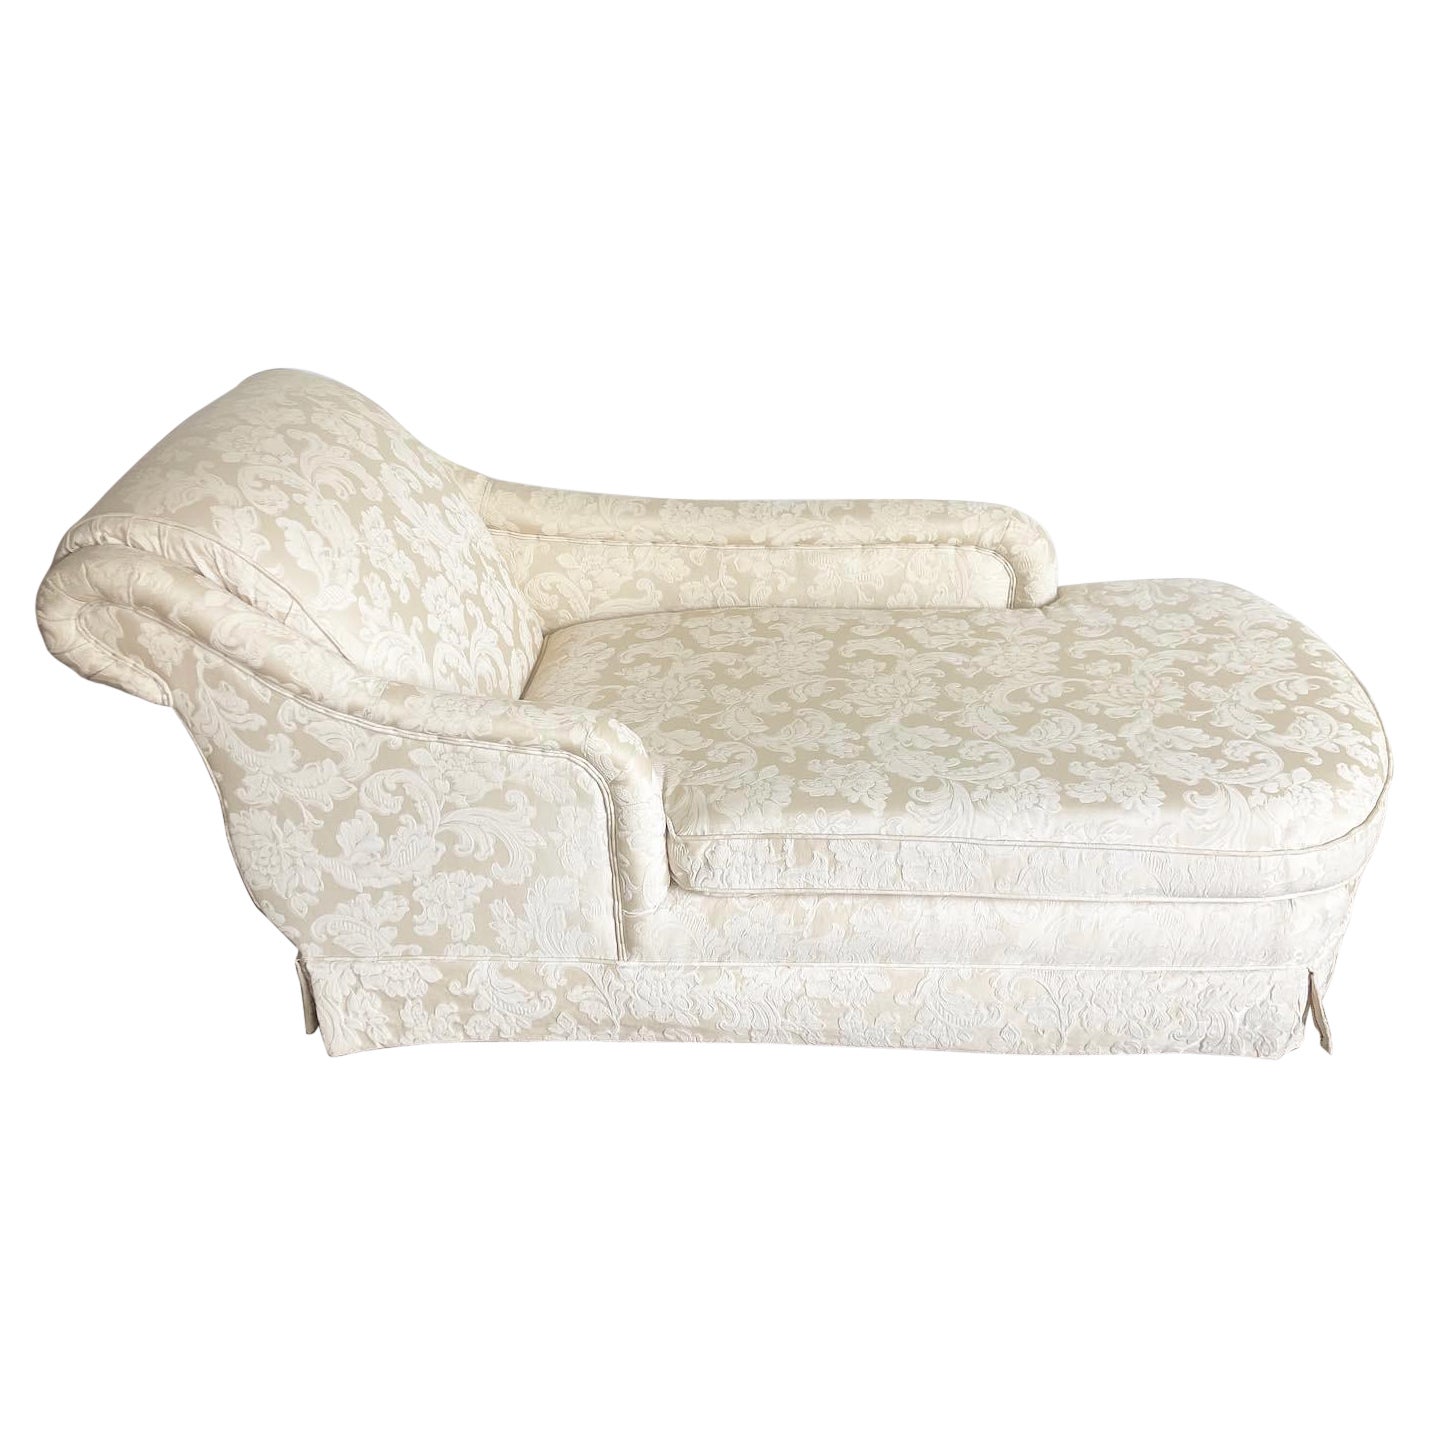 Regency Creme Stoff Chaise Lounge